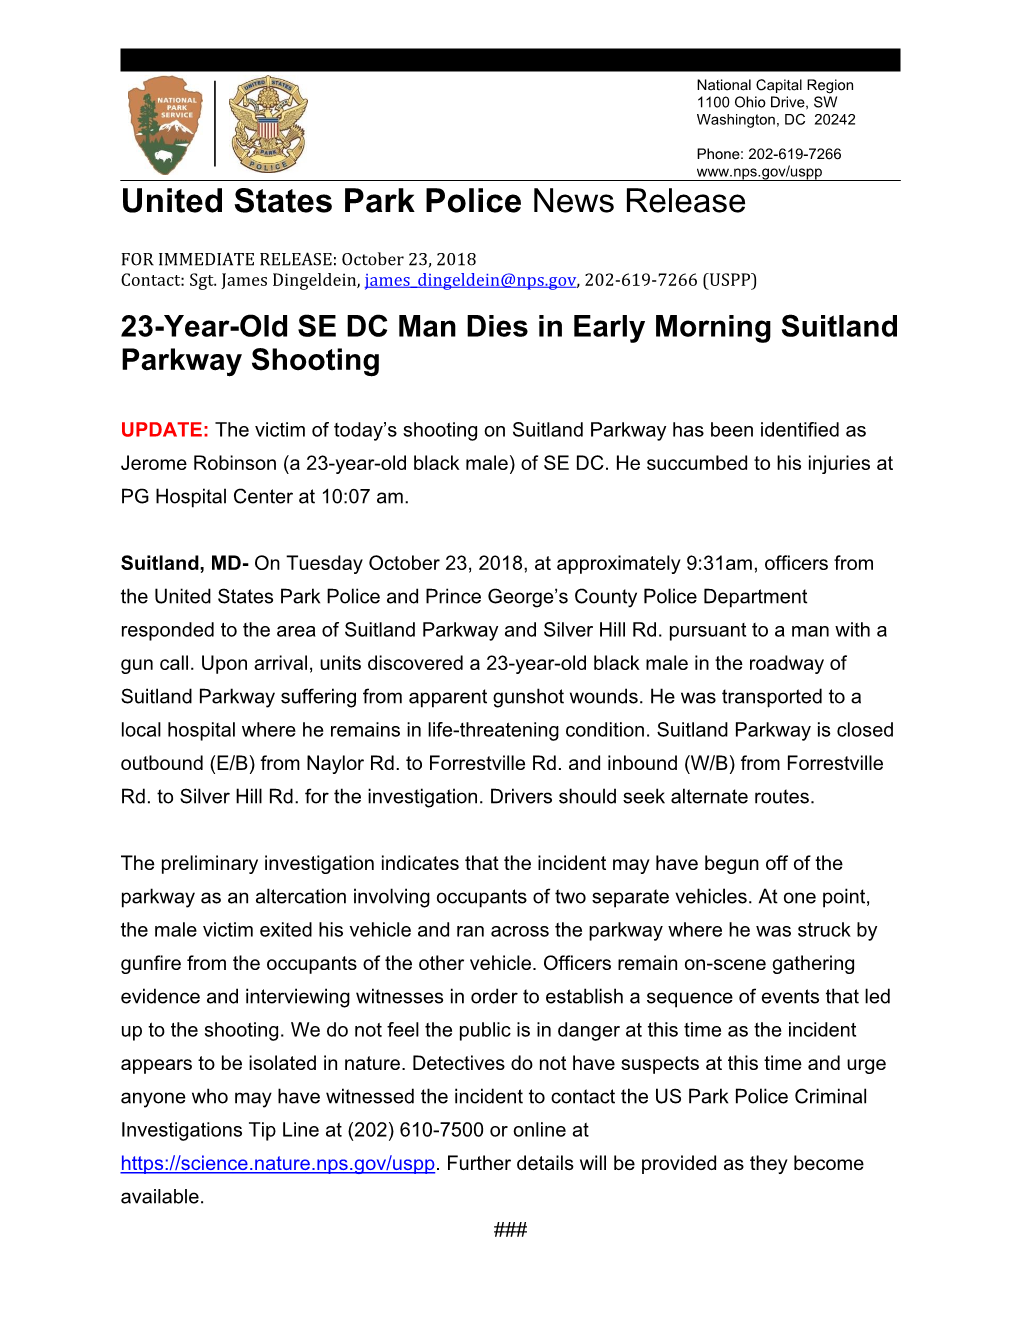 23-Year-Old SE DC Man Dies in Early Morning Suitland Parkway Shooting